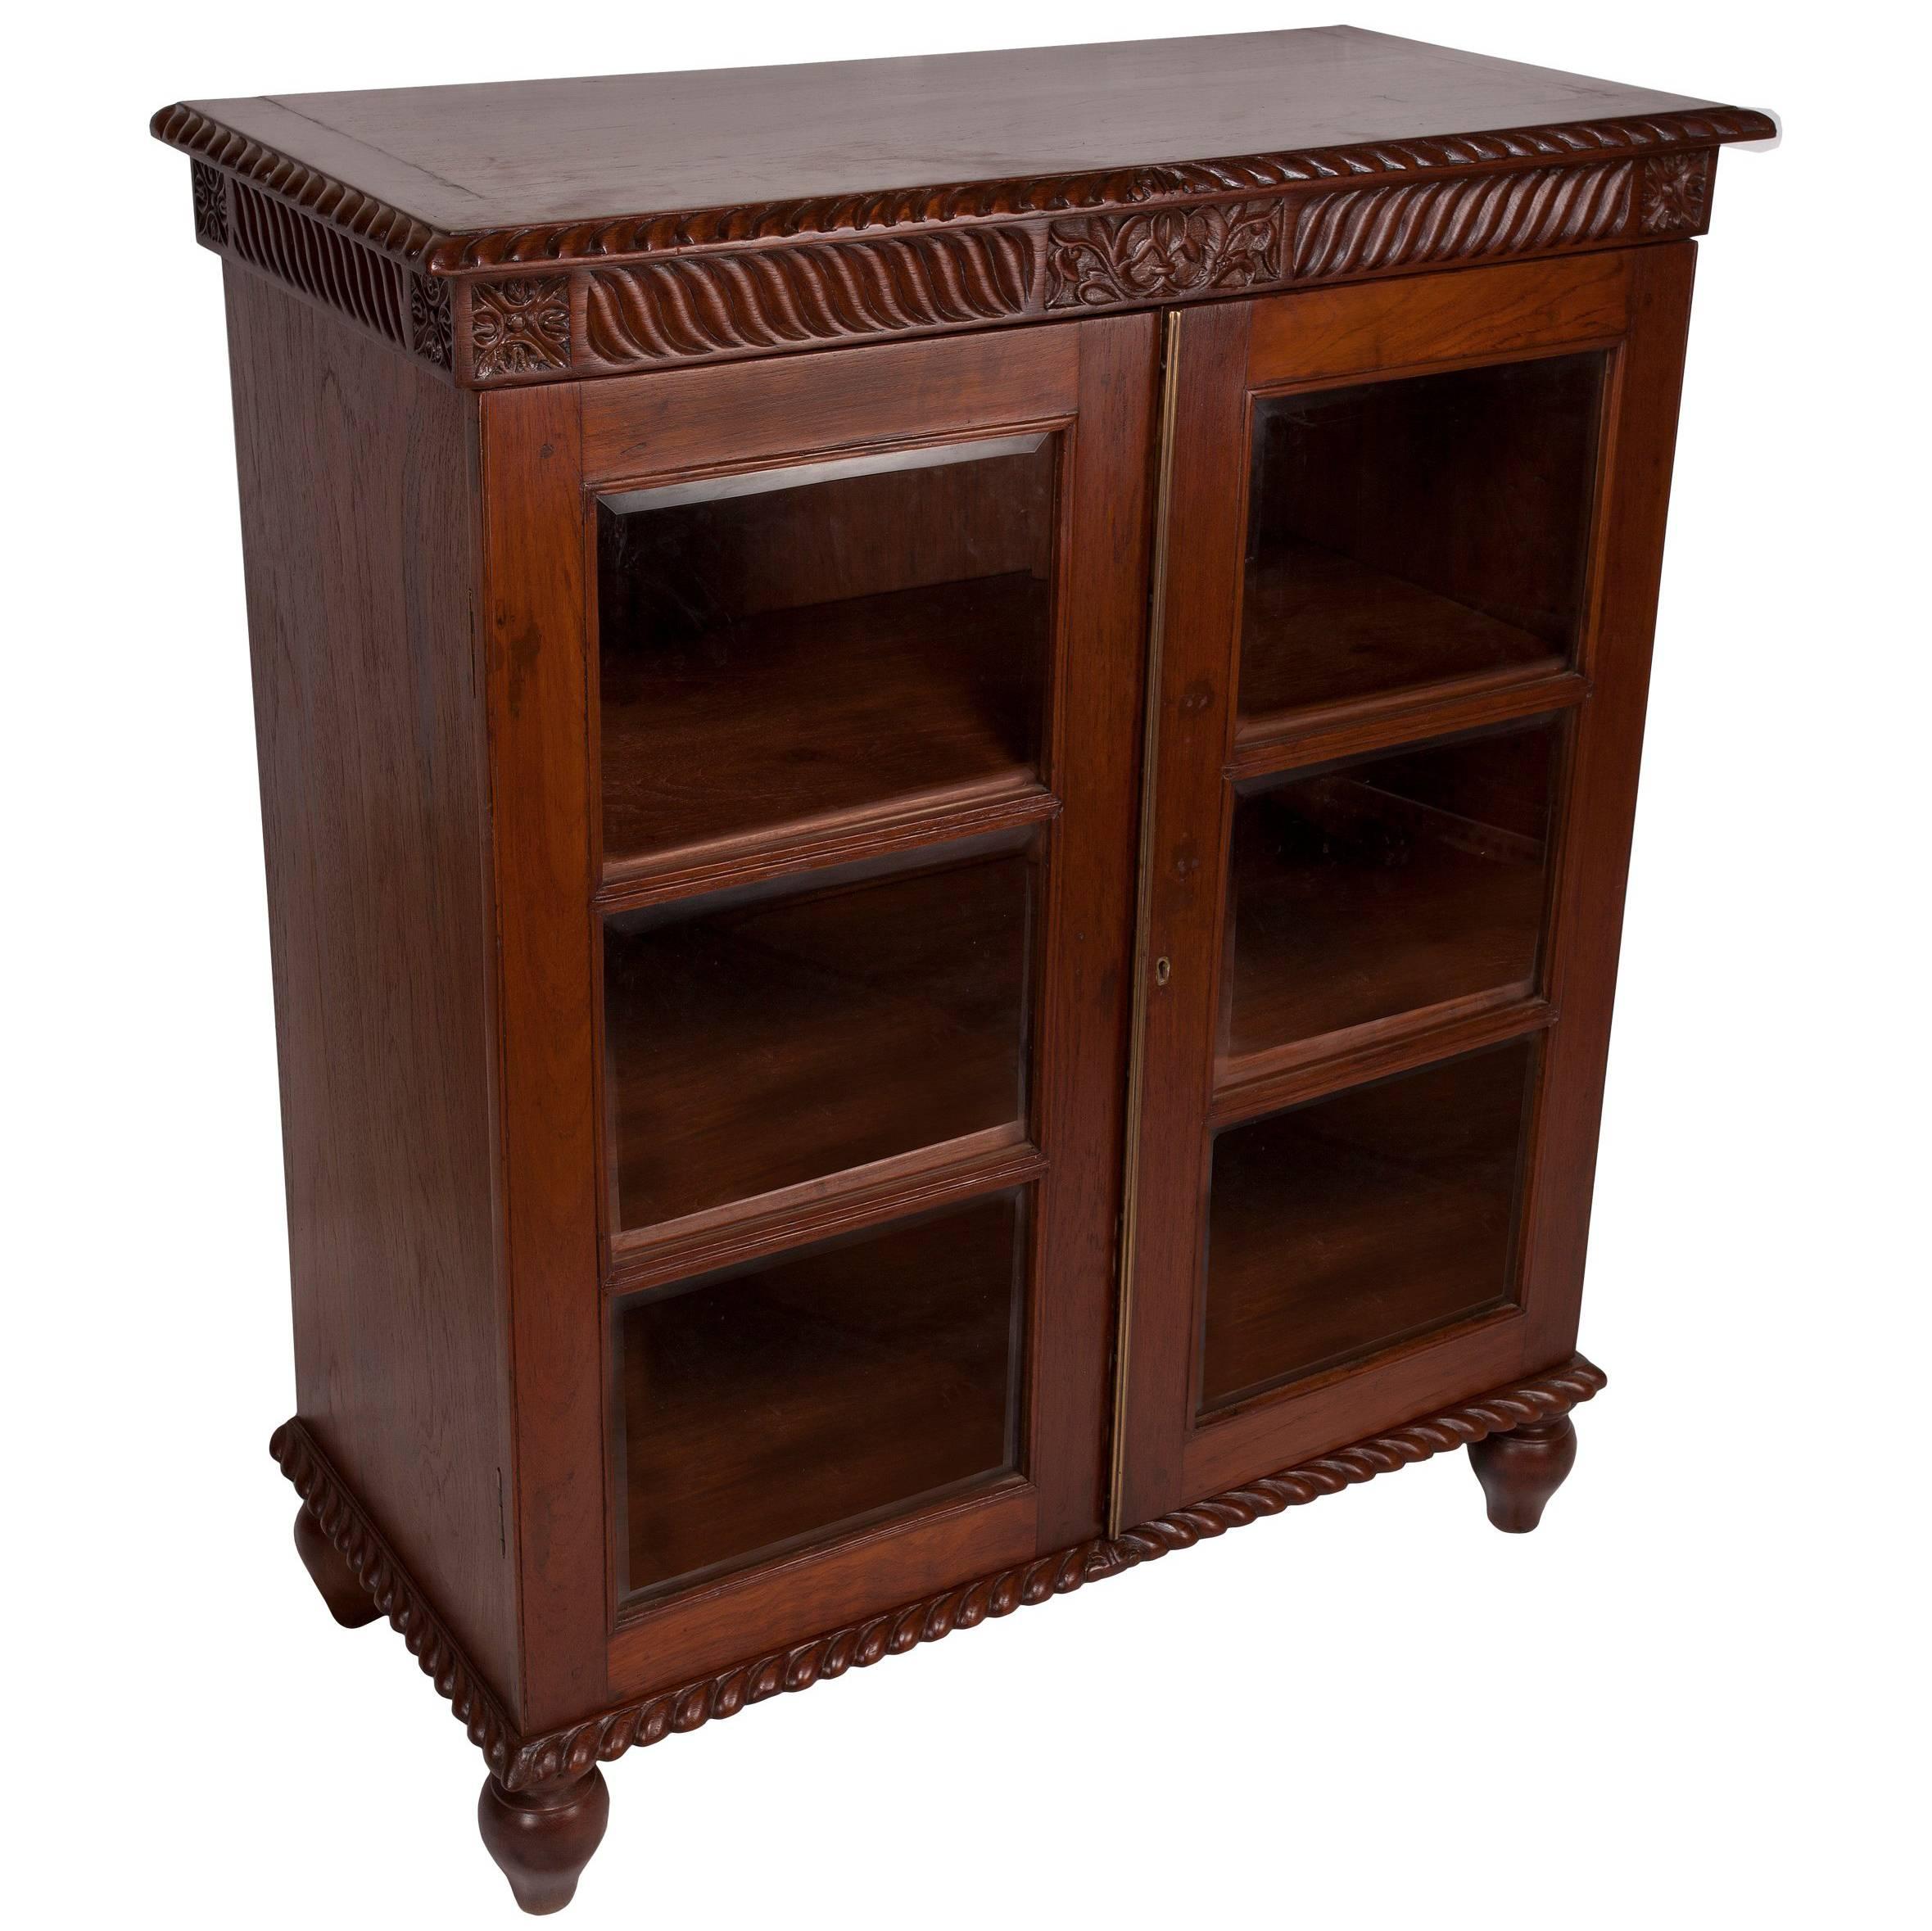 British Colonial Mahogany Petite Bookcase with Glass Door Panels, Early 1900s